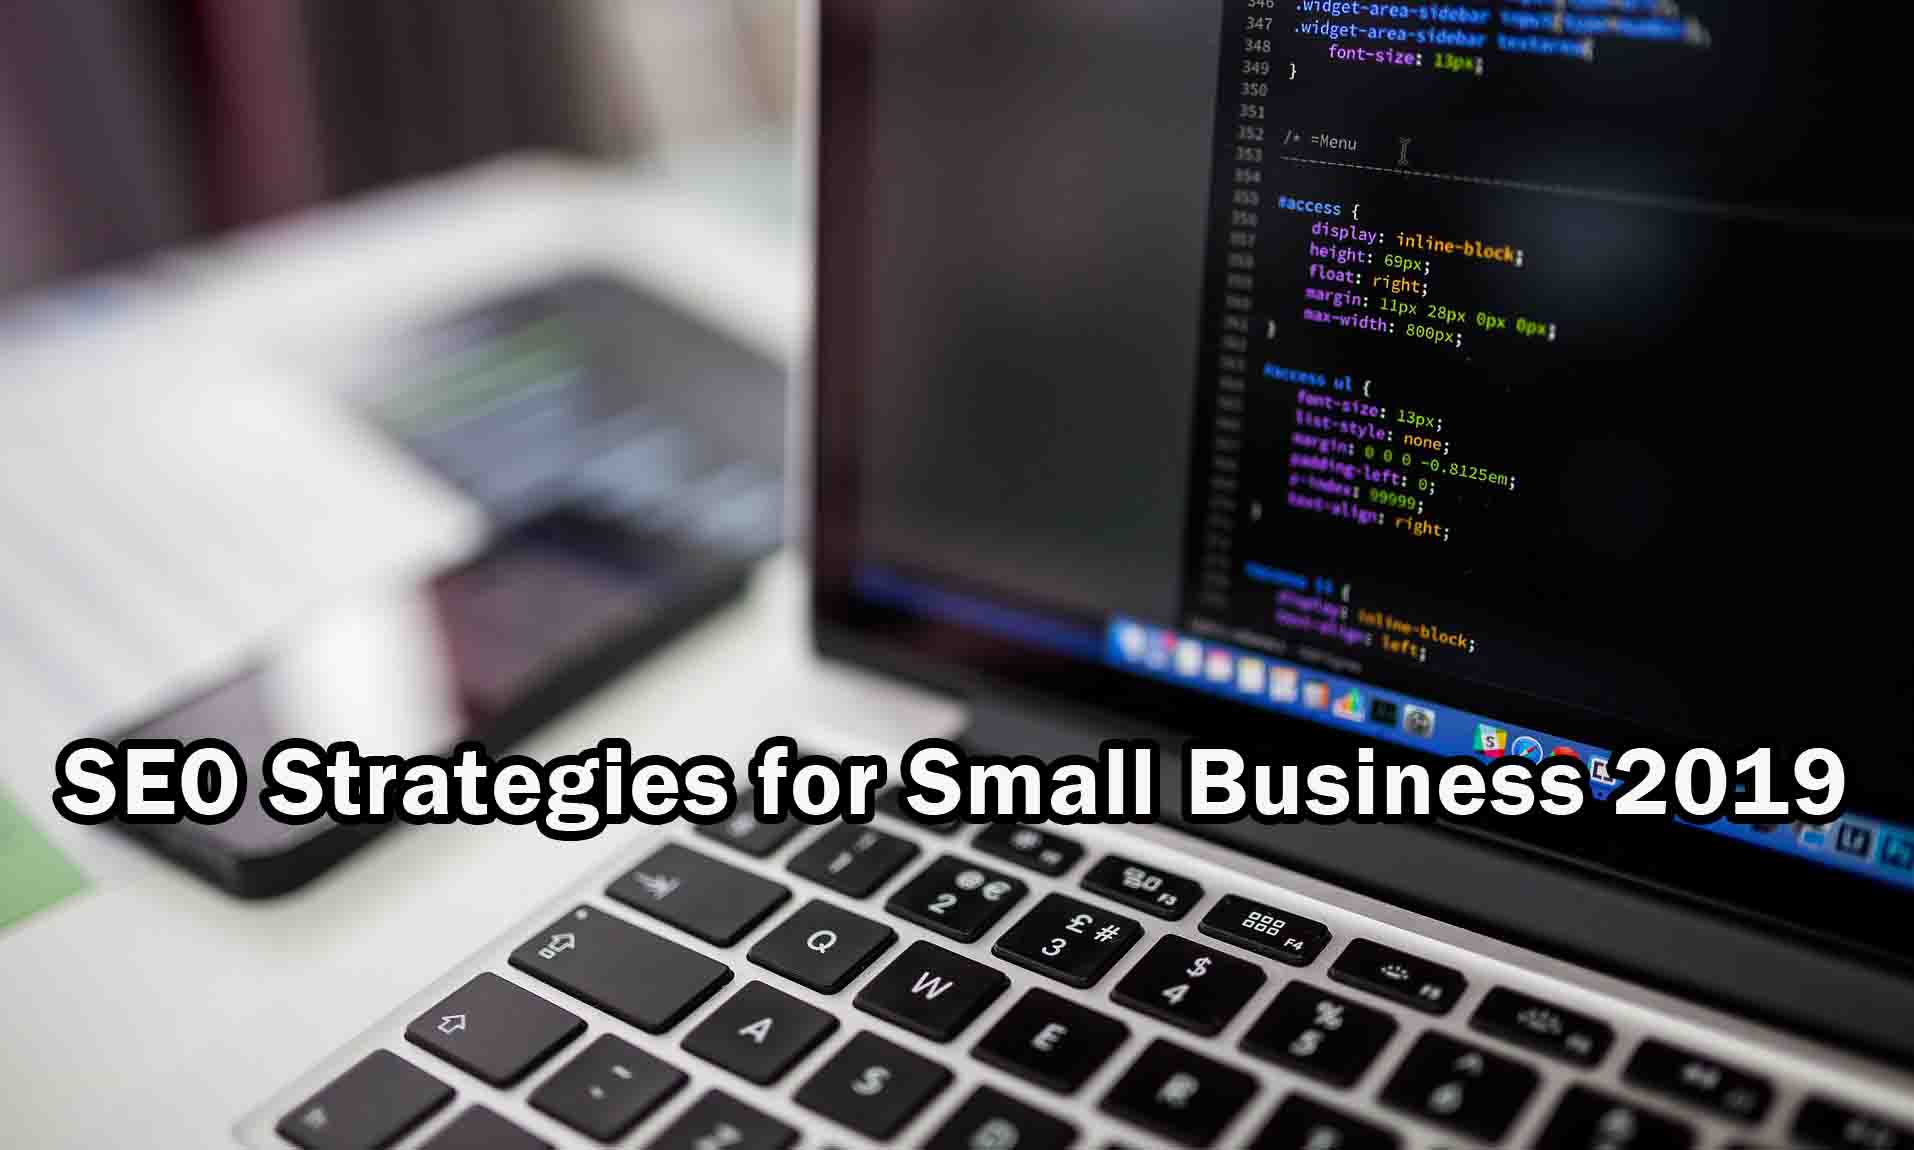 SEO Strategies for Small Business 2019